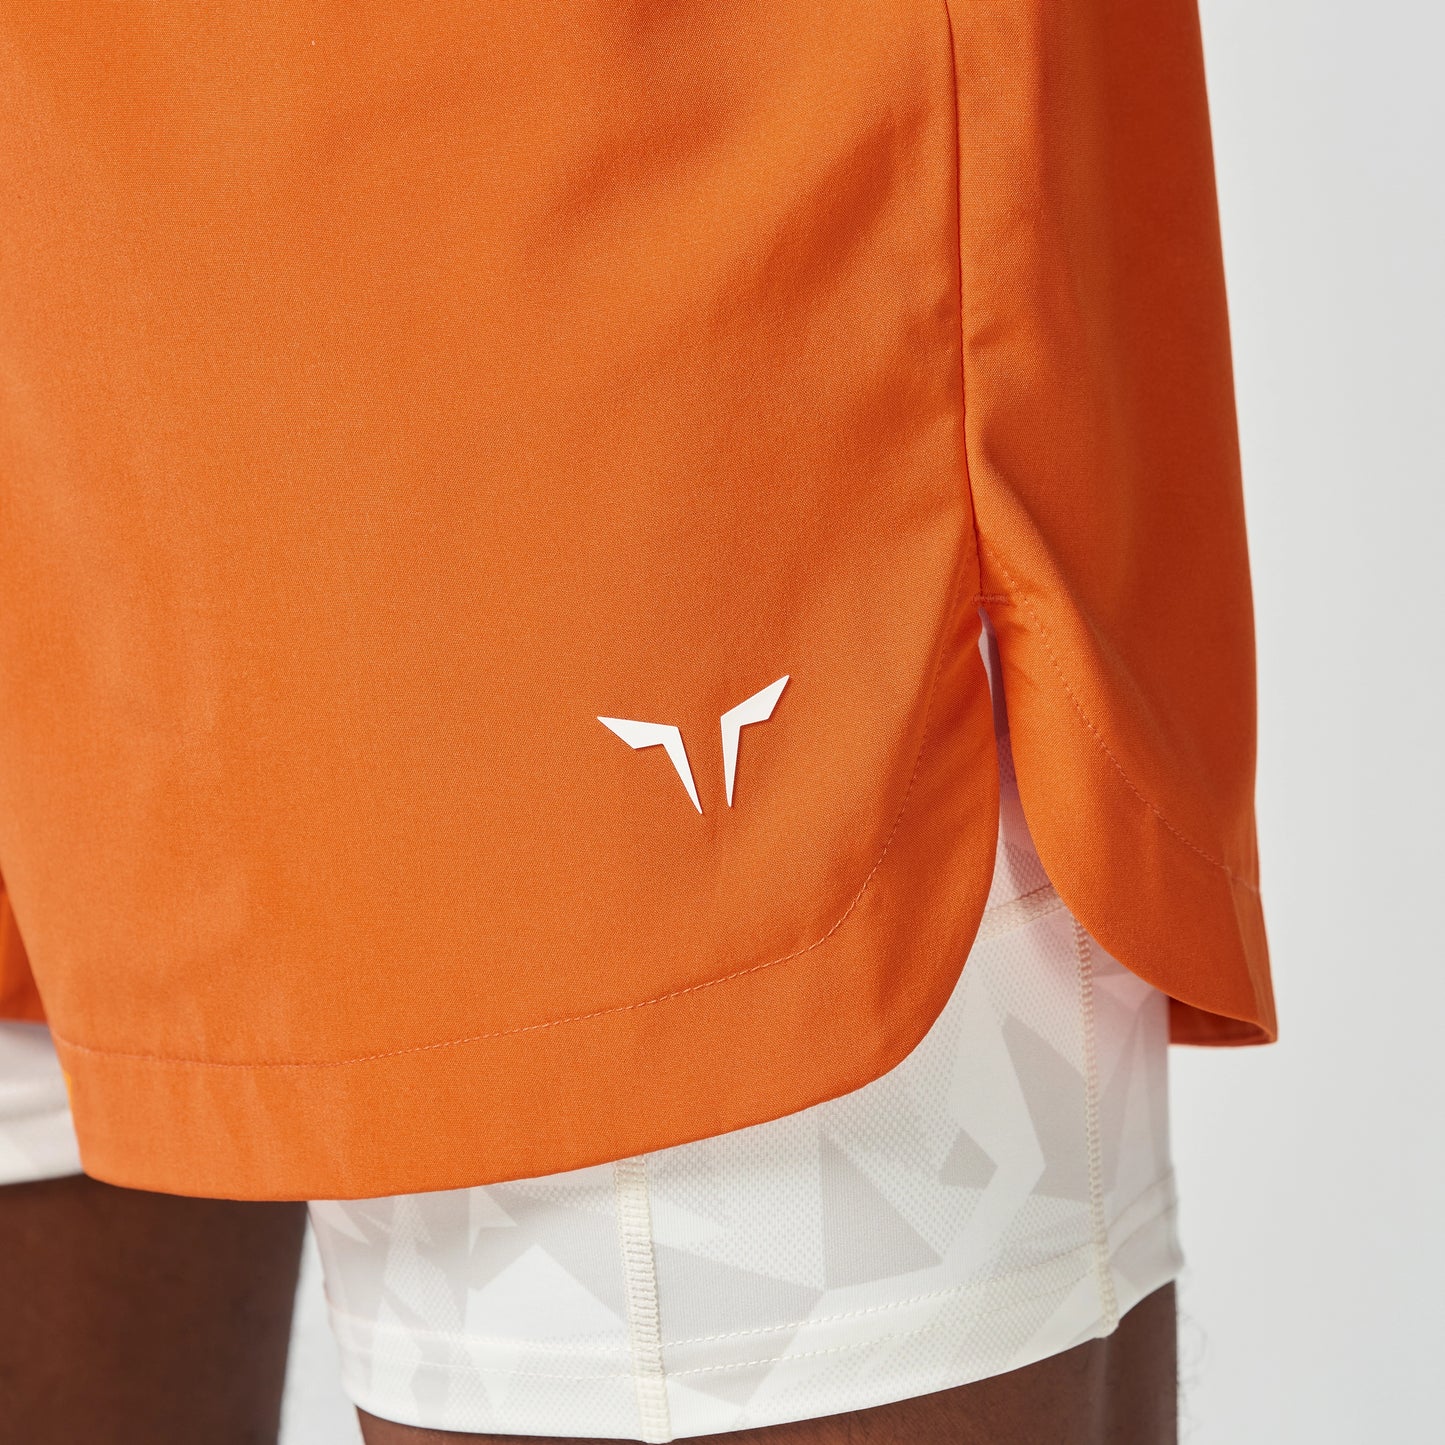 Limitless 2-in-1 7" Shorts - Persimmon Orange